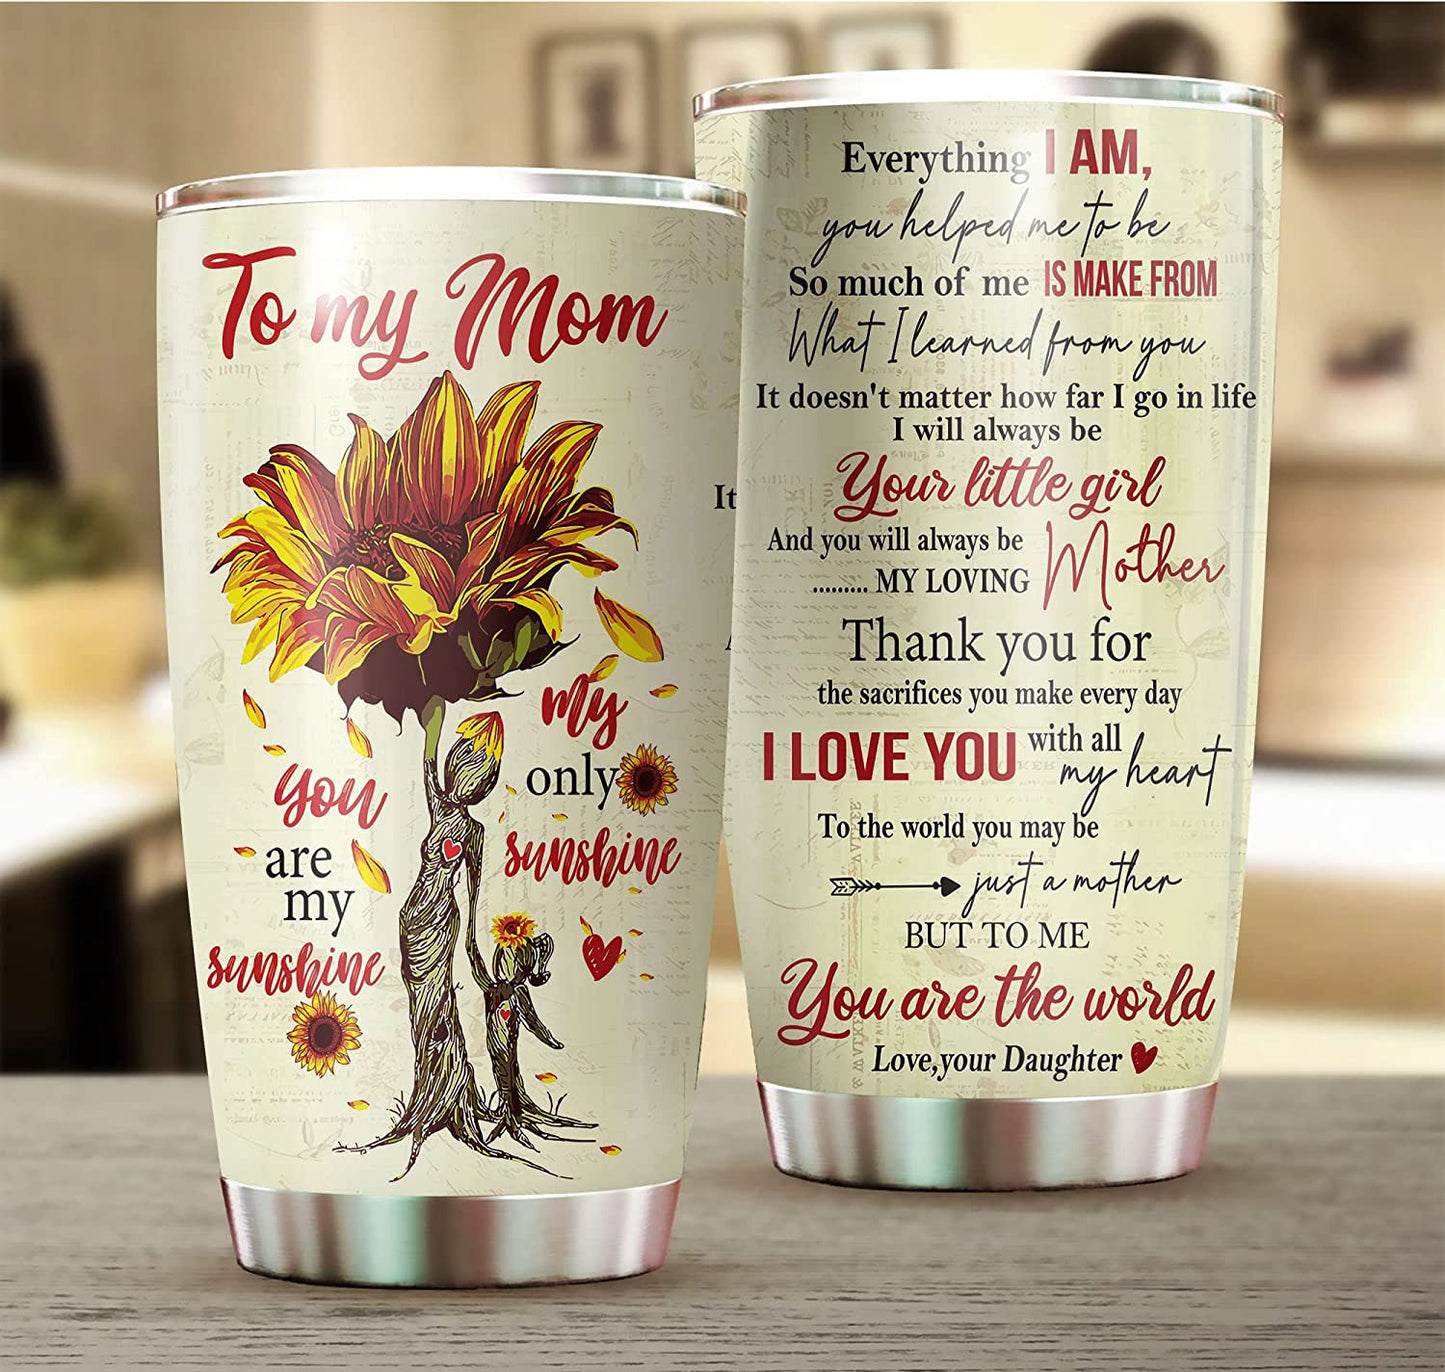 Gifts for Mom, My Nickname Is Mom Funny Coffee Mug, Mom Christmas Mothers  Day Birthday Gifts from Daughter Son Kids, Best Mom Gifts, Funny Gift Ideas  for Mom, Present for Mom, Mom